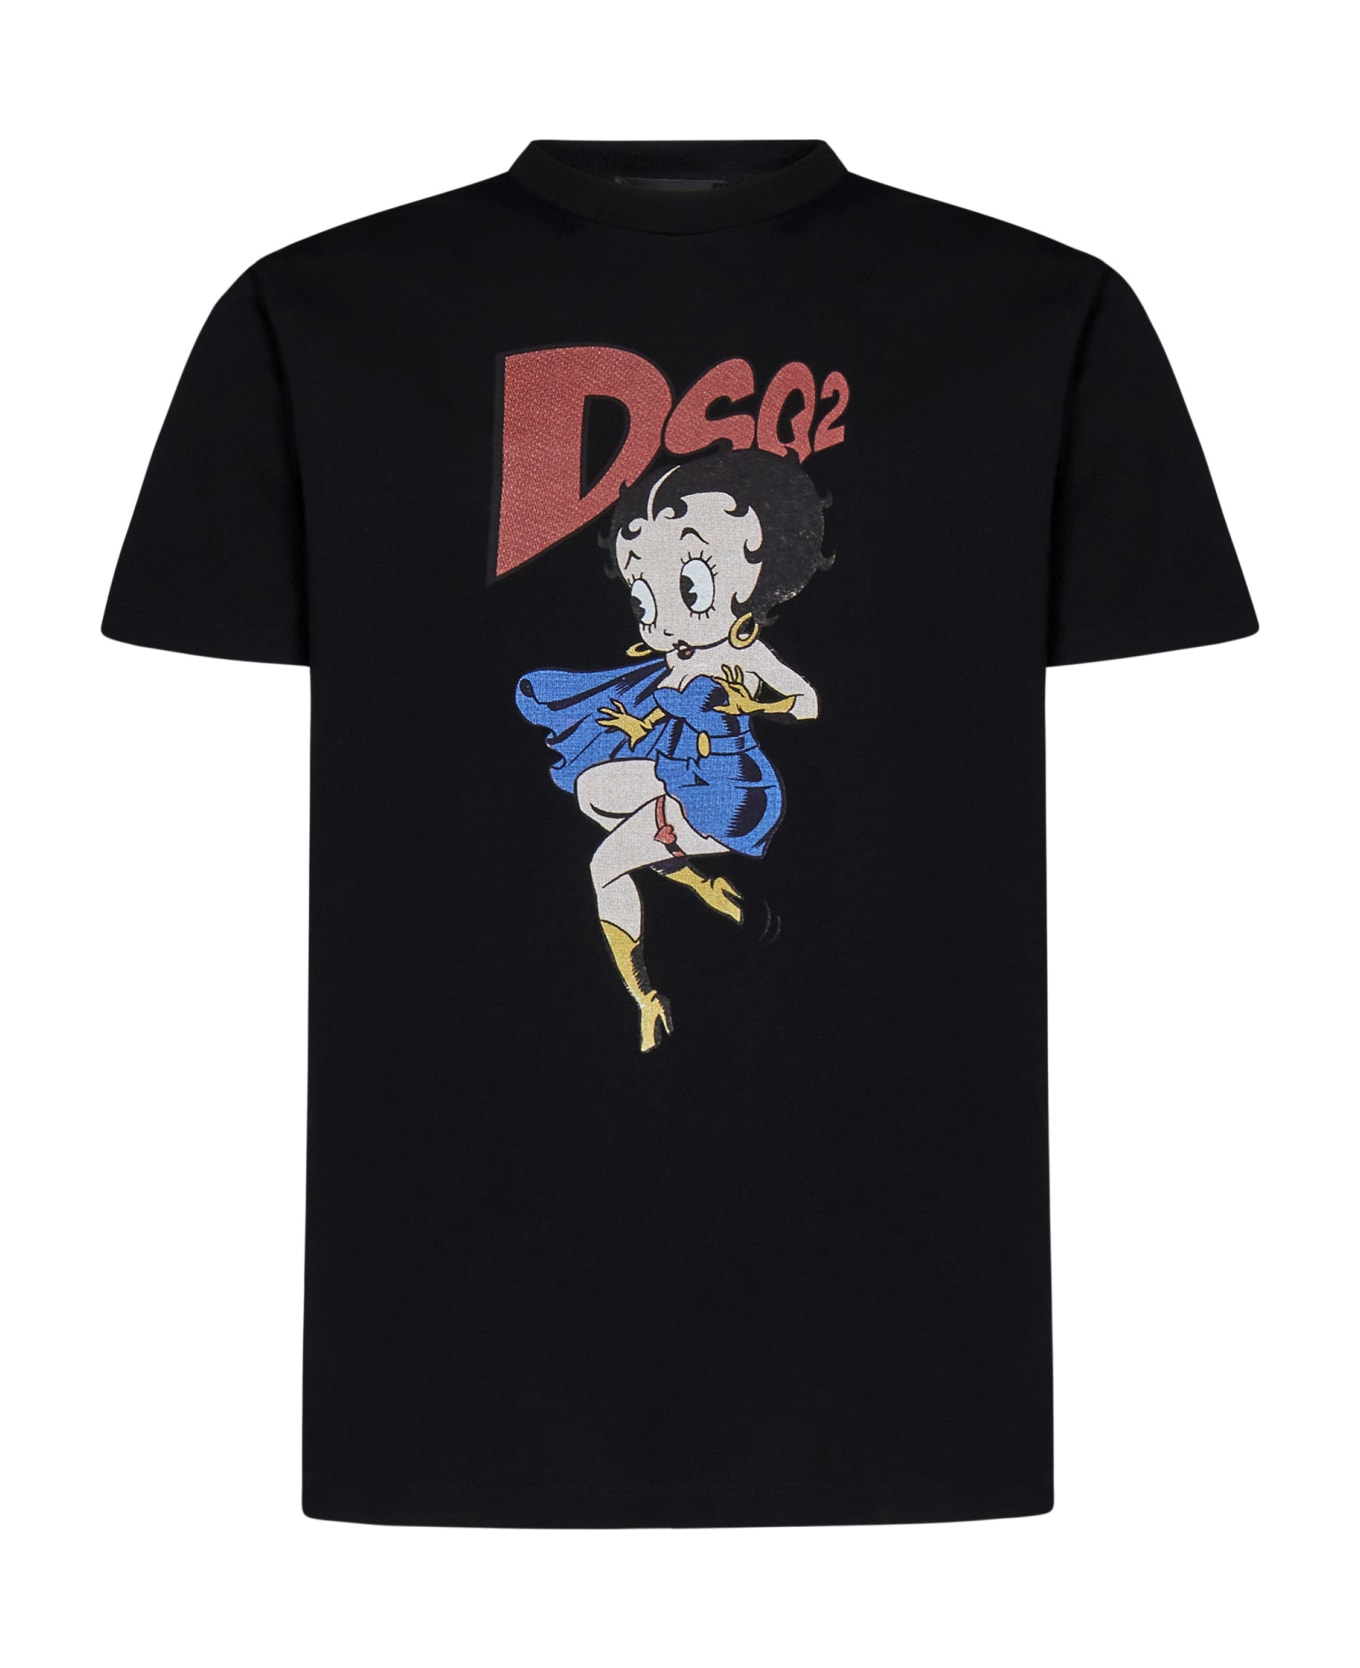 Dsquared2 Betty Boop Cool Fit T-shirt - Black